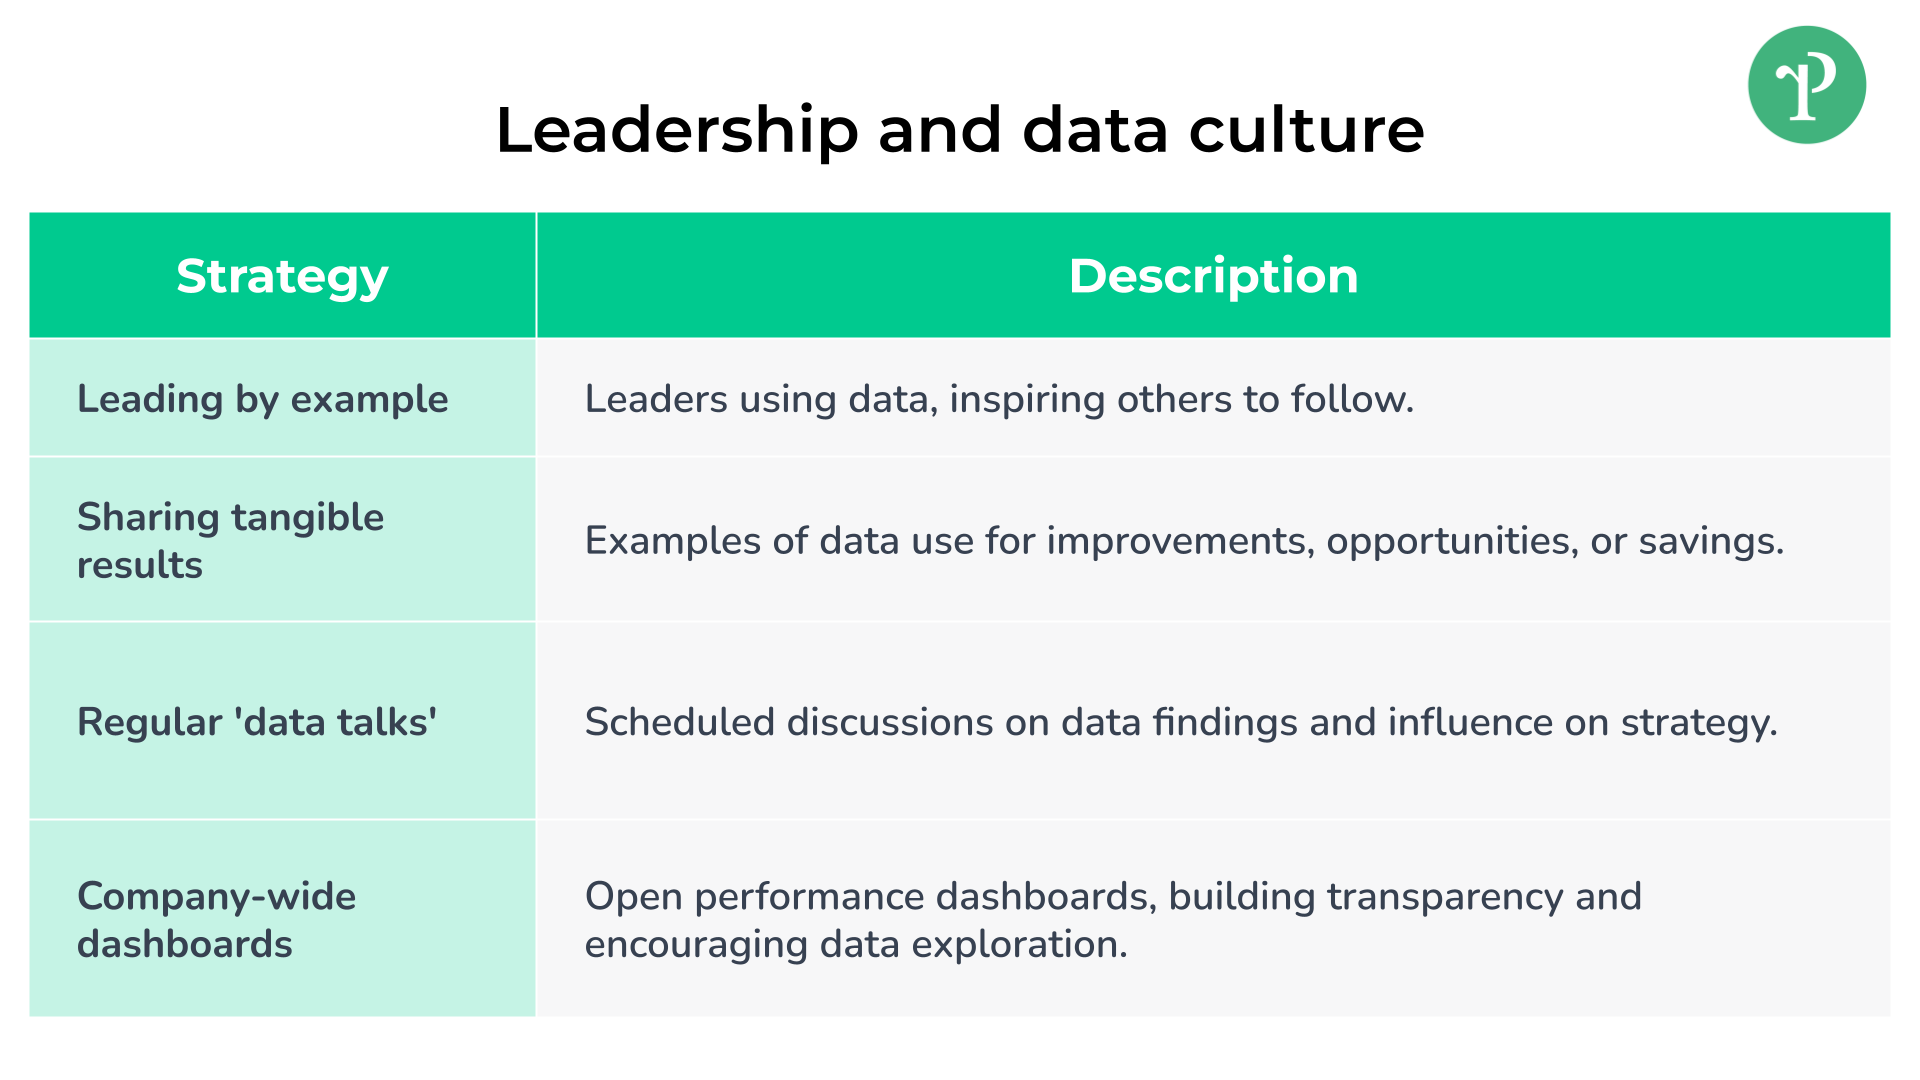 Leadership and data culture